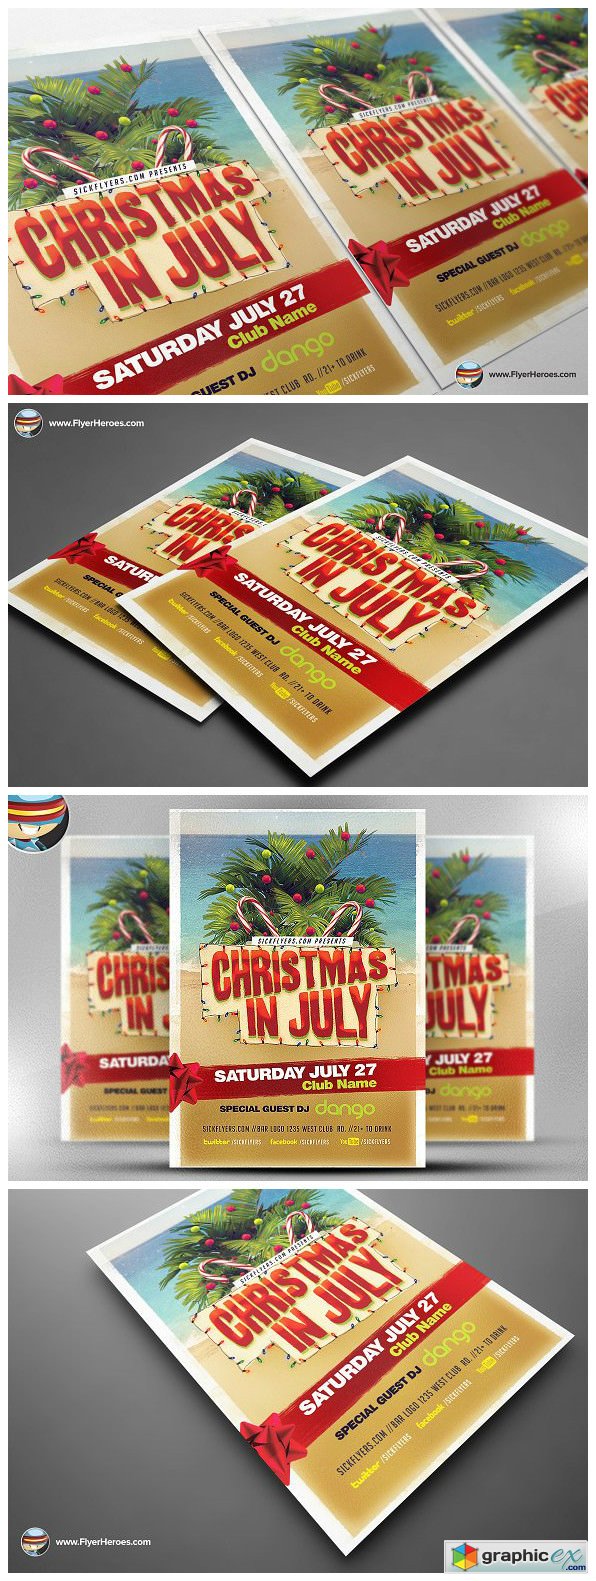 Christmas in July Flyer Template v2